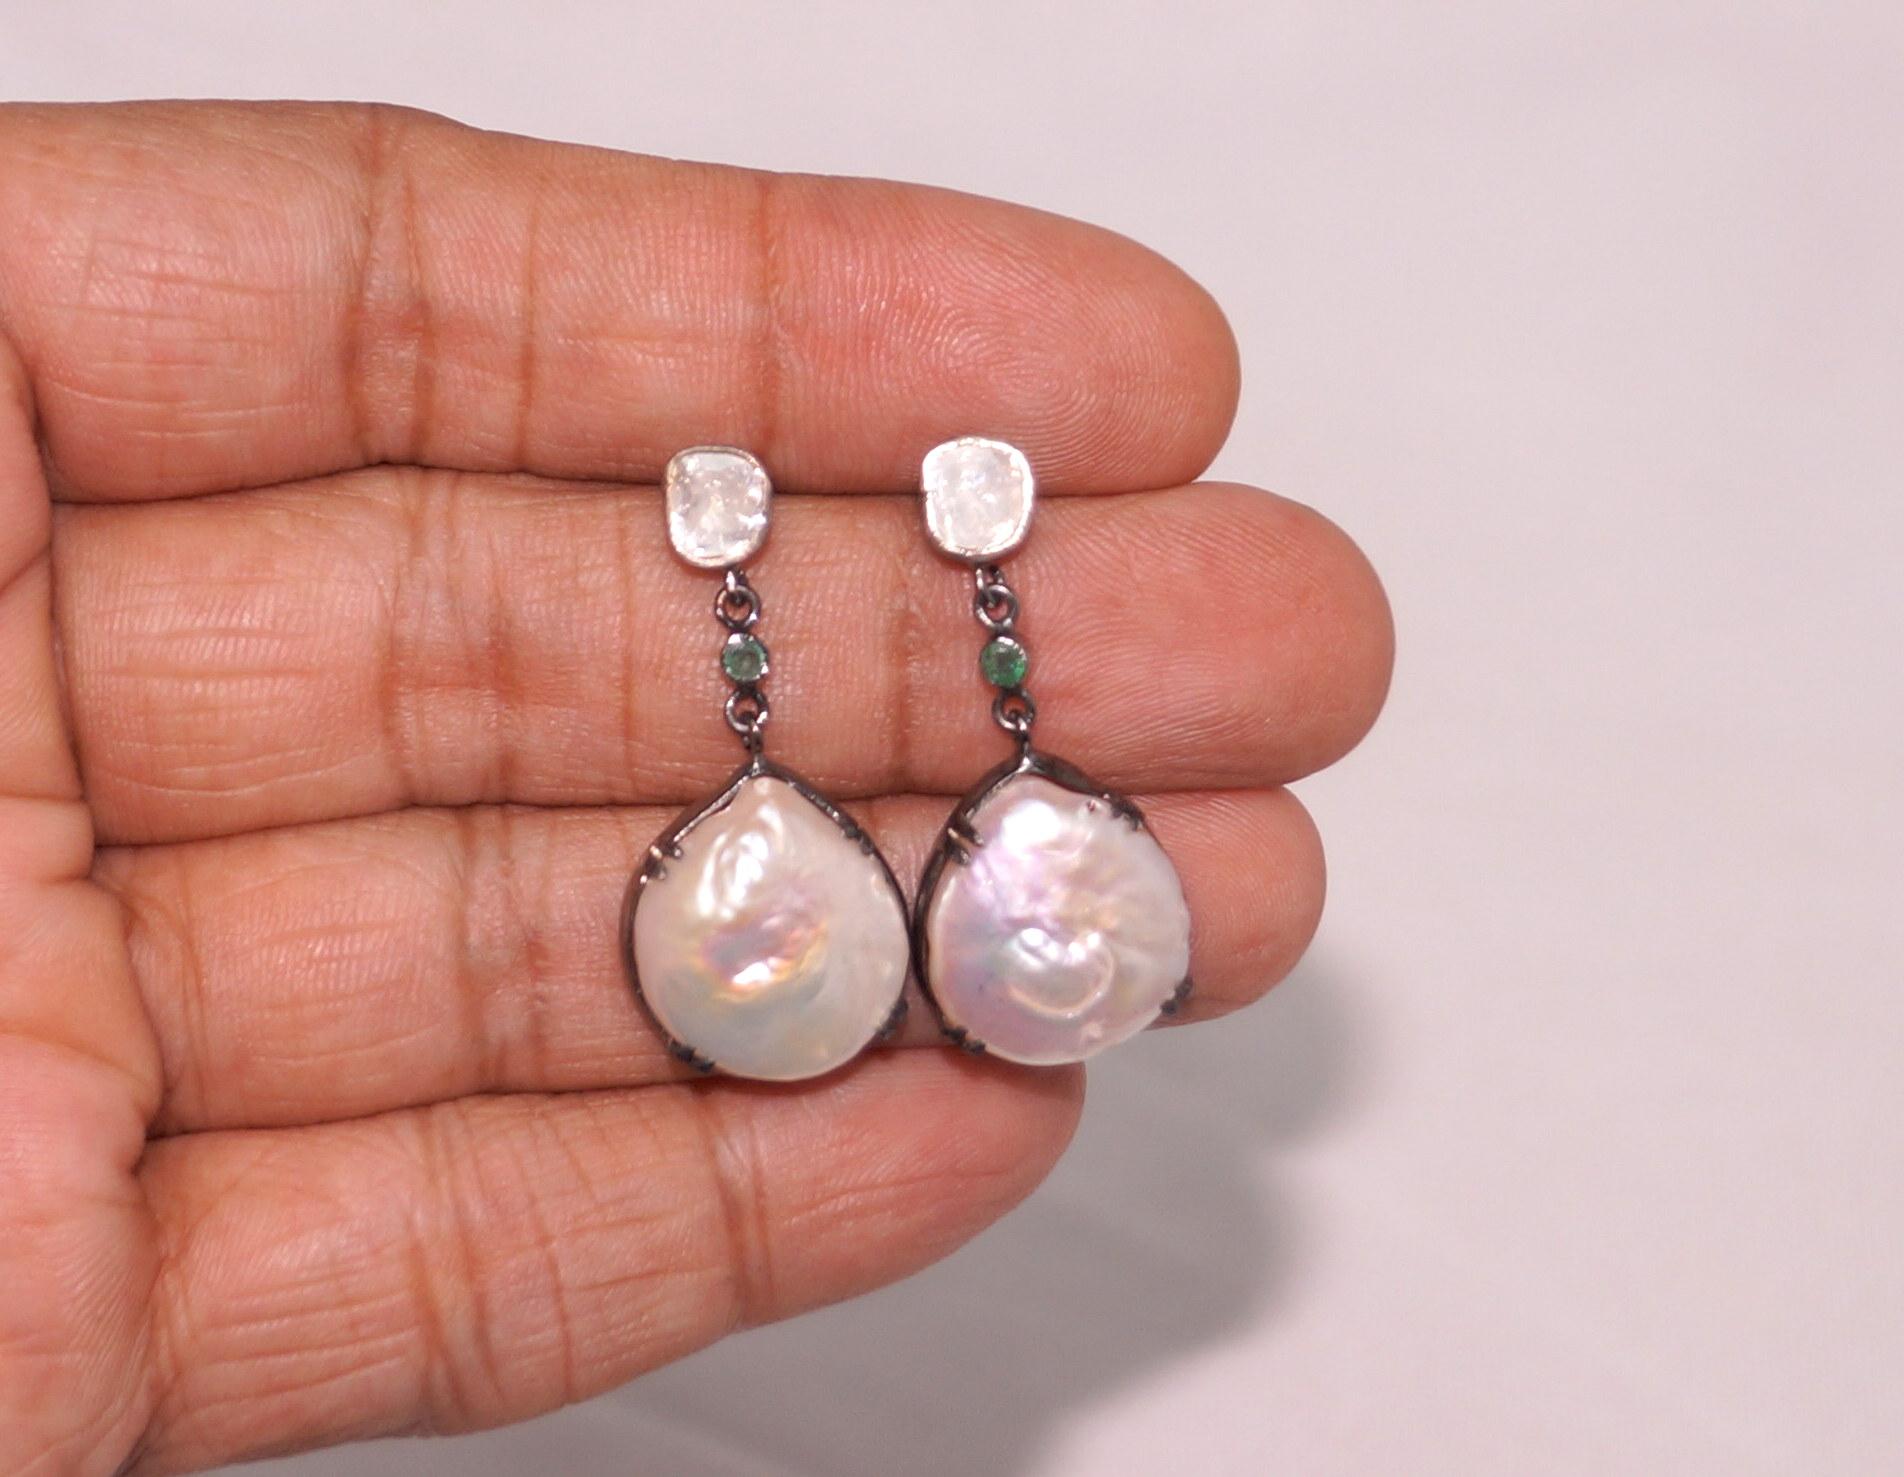 Stunning Baroque Pearl diamond sterling silver earrings consists of :

Main Gemstone- Pearl
Type- Natural Baroque pearl
Metal- Silver
Metal Purity- sterling silver
Color of metal- oxidized silver Look
Diamond- Natural uncut diamonds and rose cut